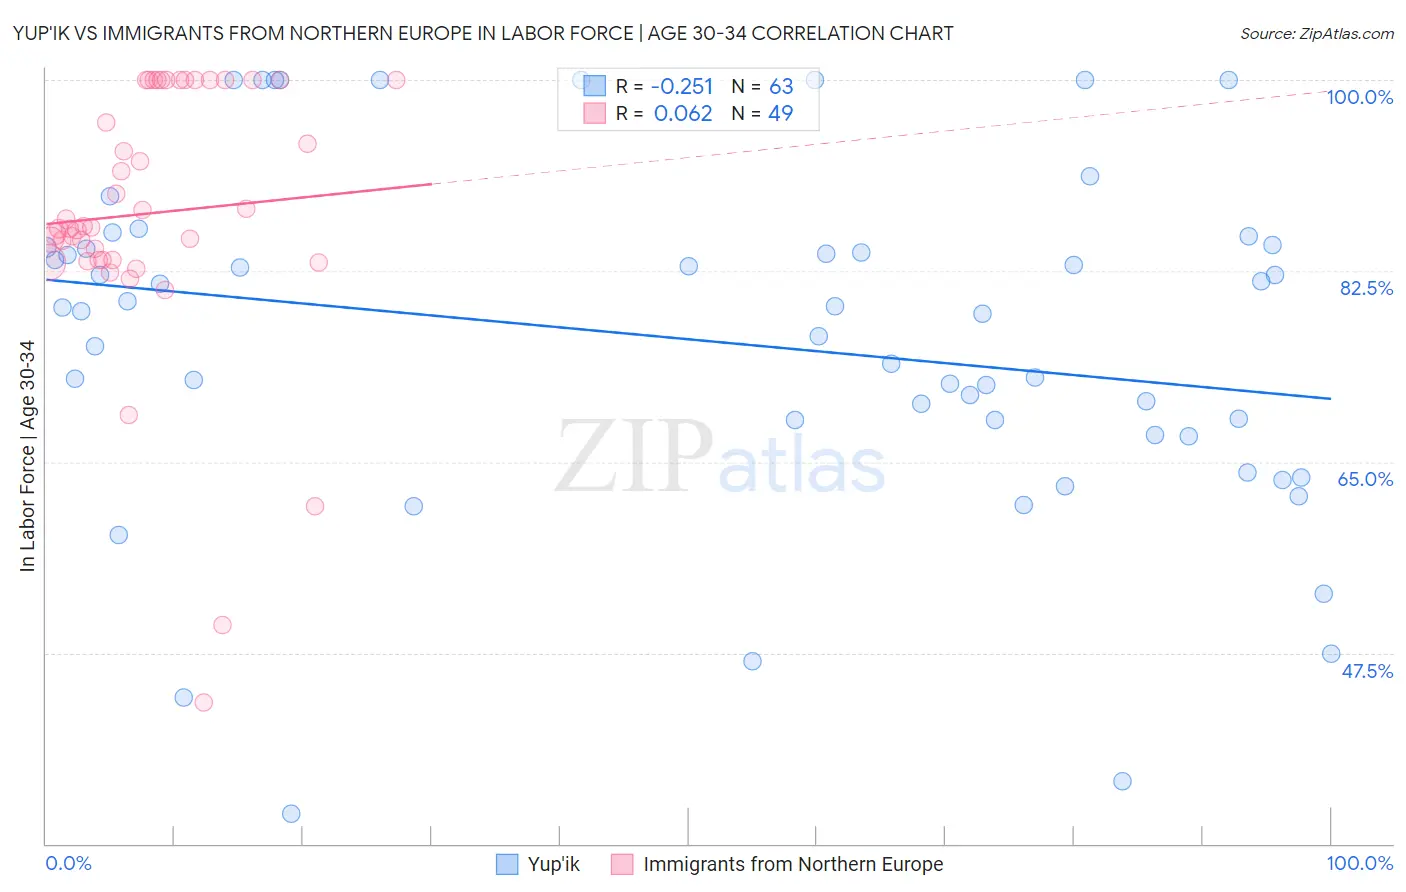 Yup'ik vs Immigrants from Northern Europe In Labor Force | Age 30-34